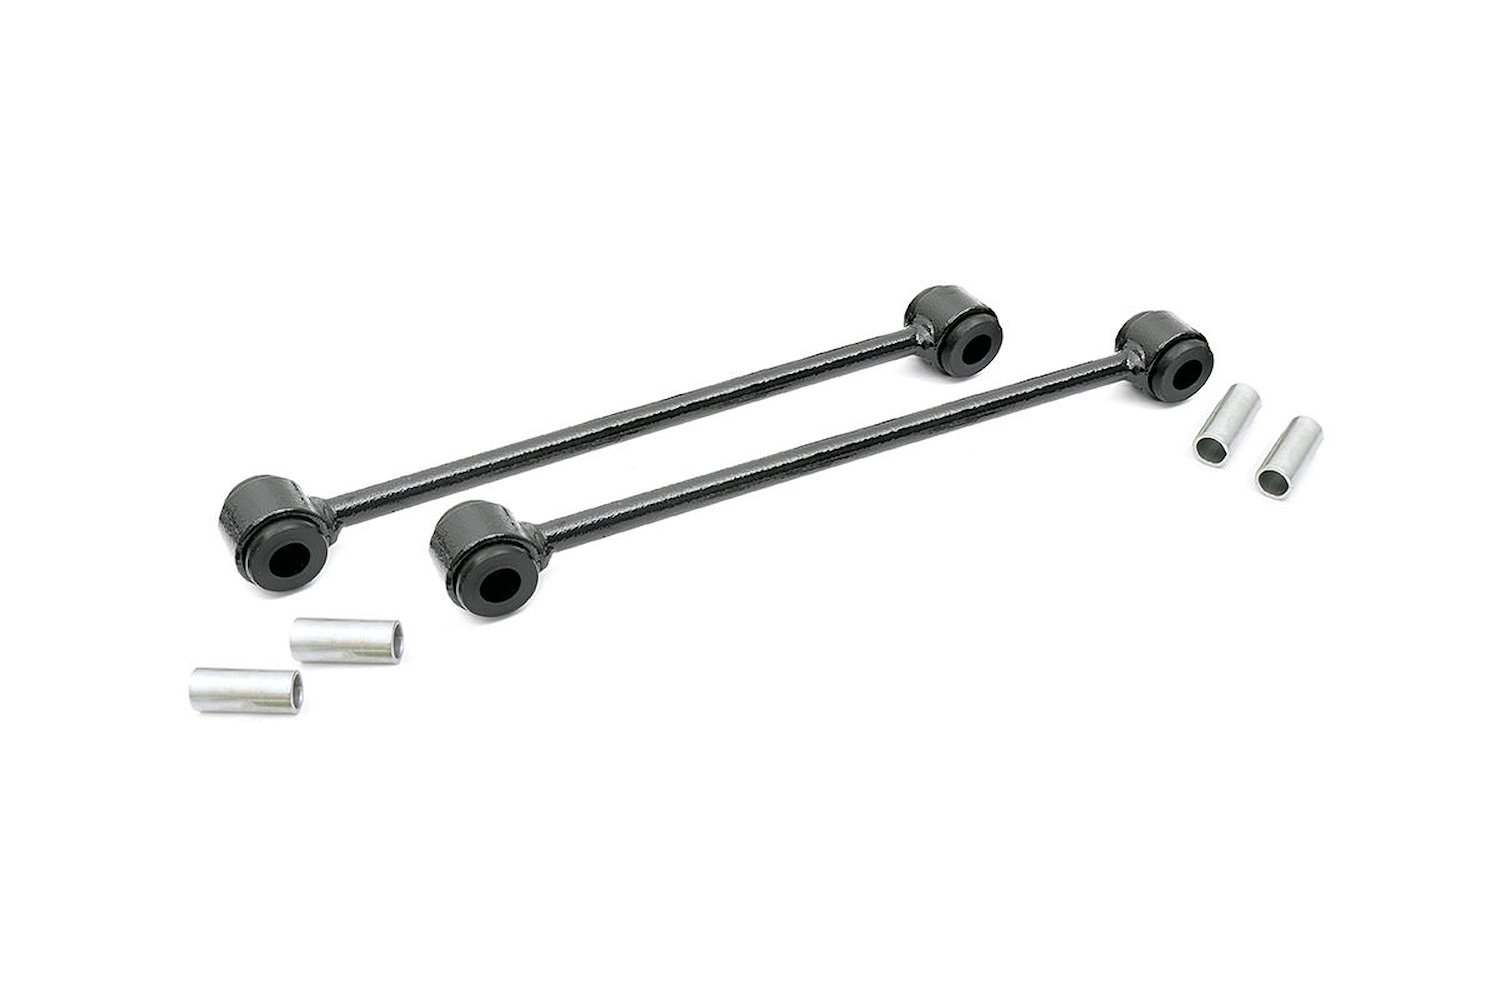 1024 Rear Sway Bar Links for 8-inch Lifts